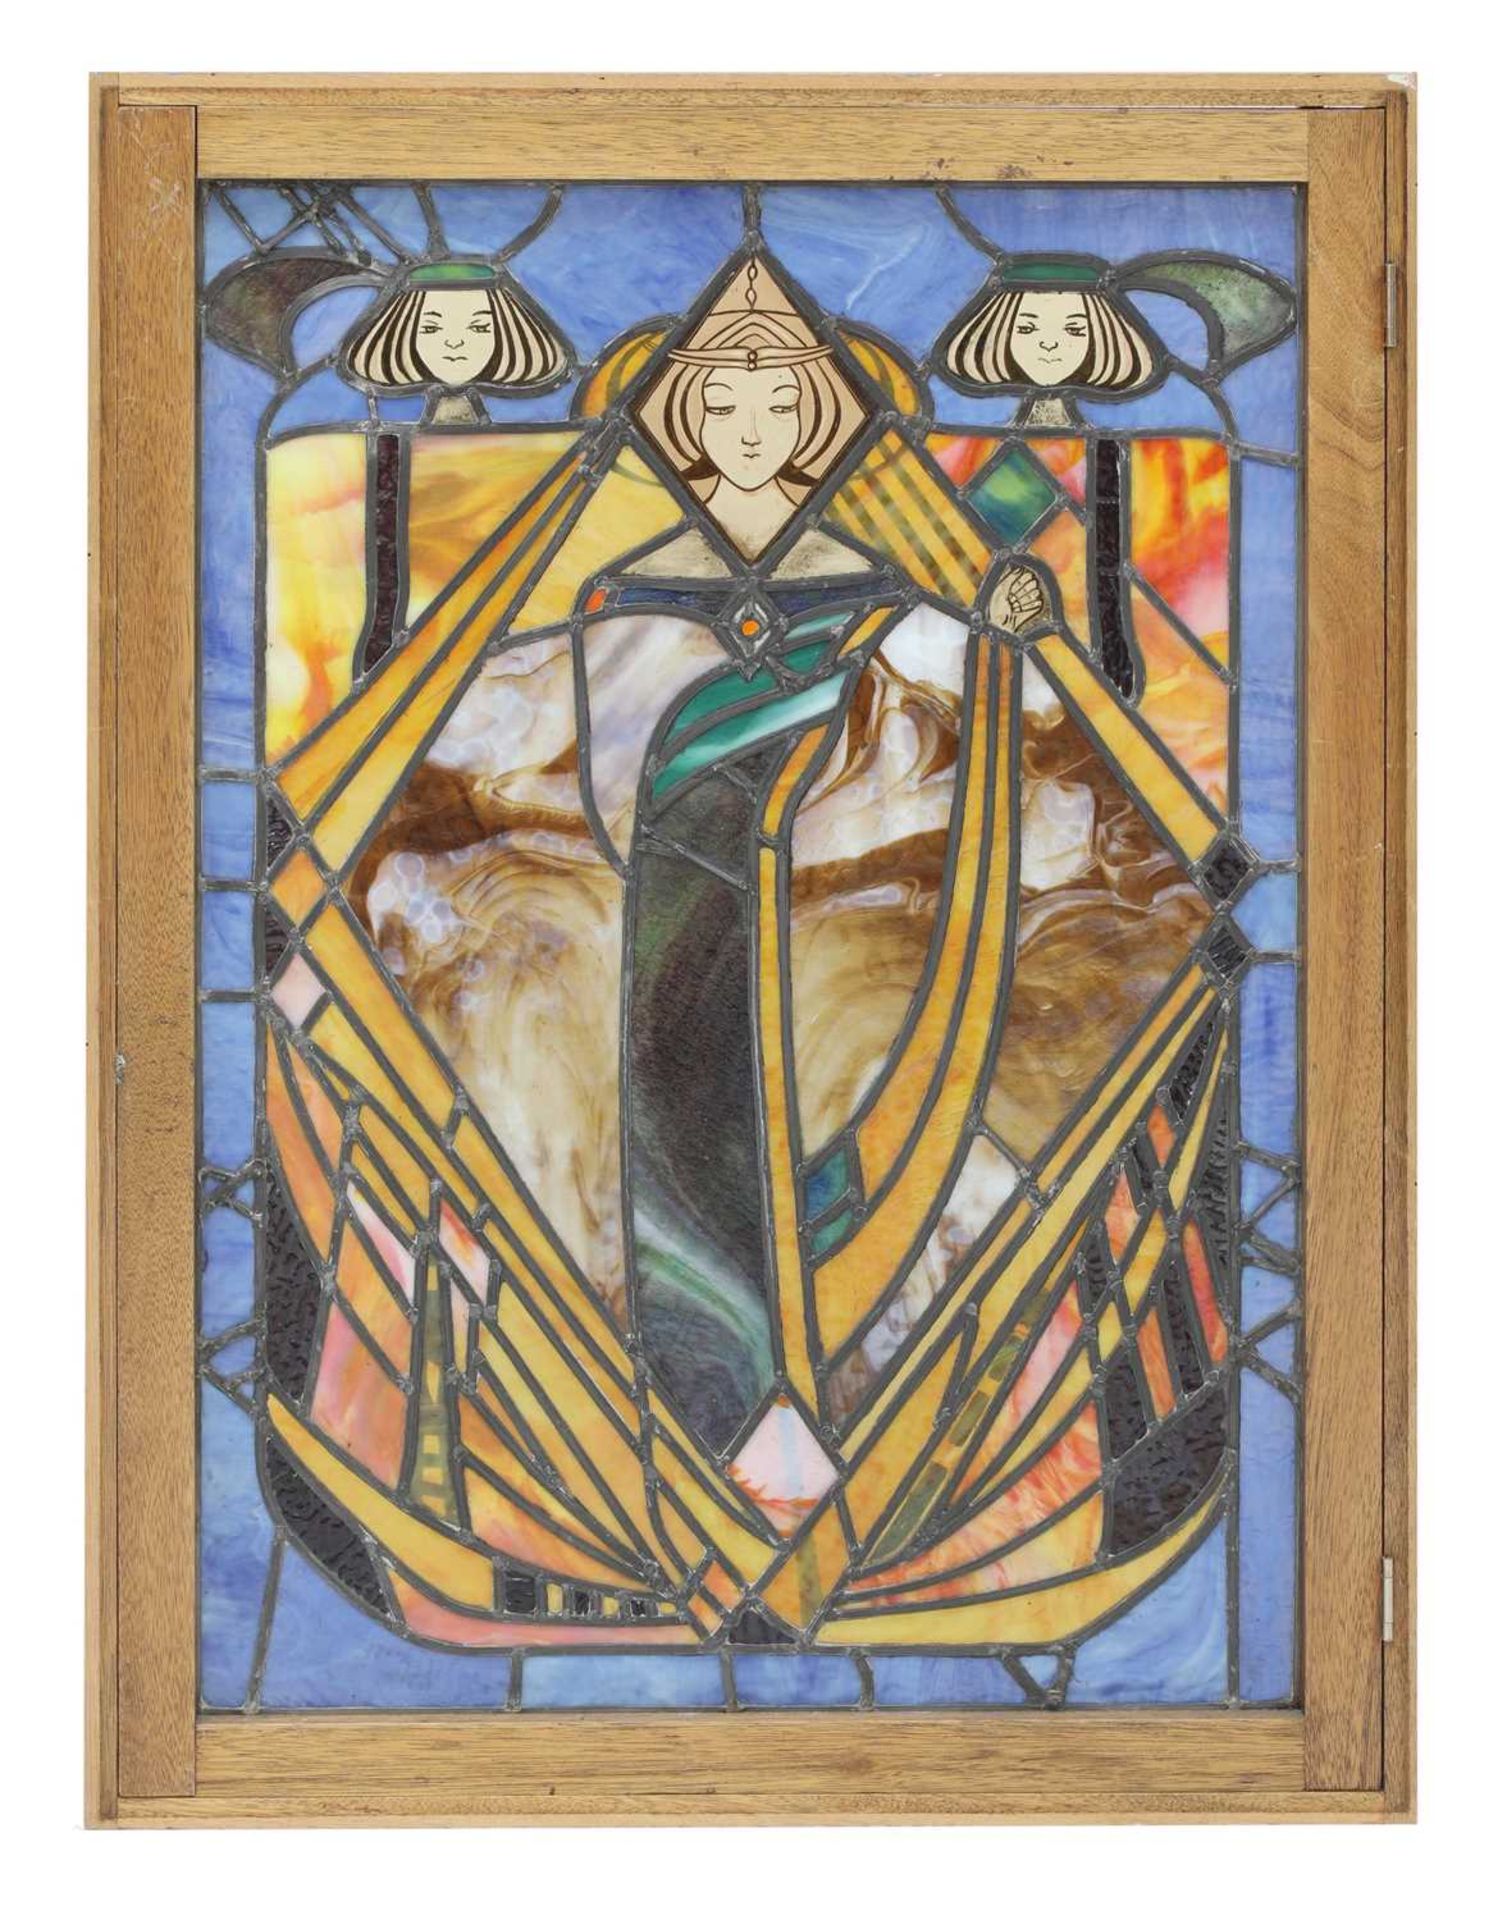 A Glasgow Style 'The Queens' stained glass window, - Image 2 of 2